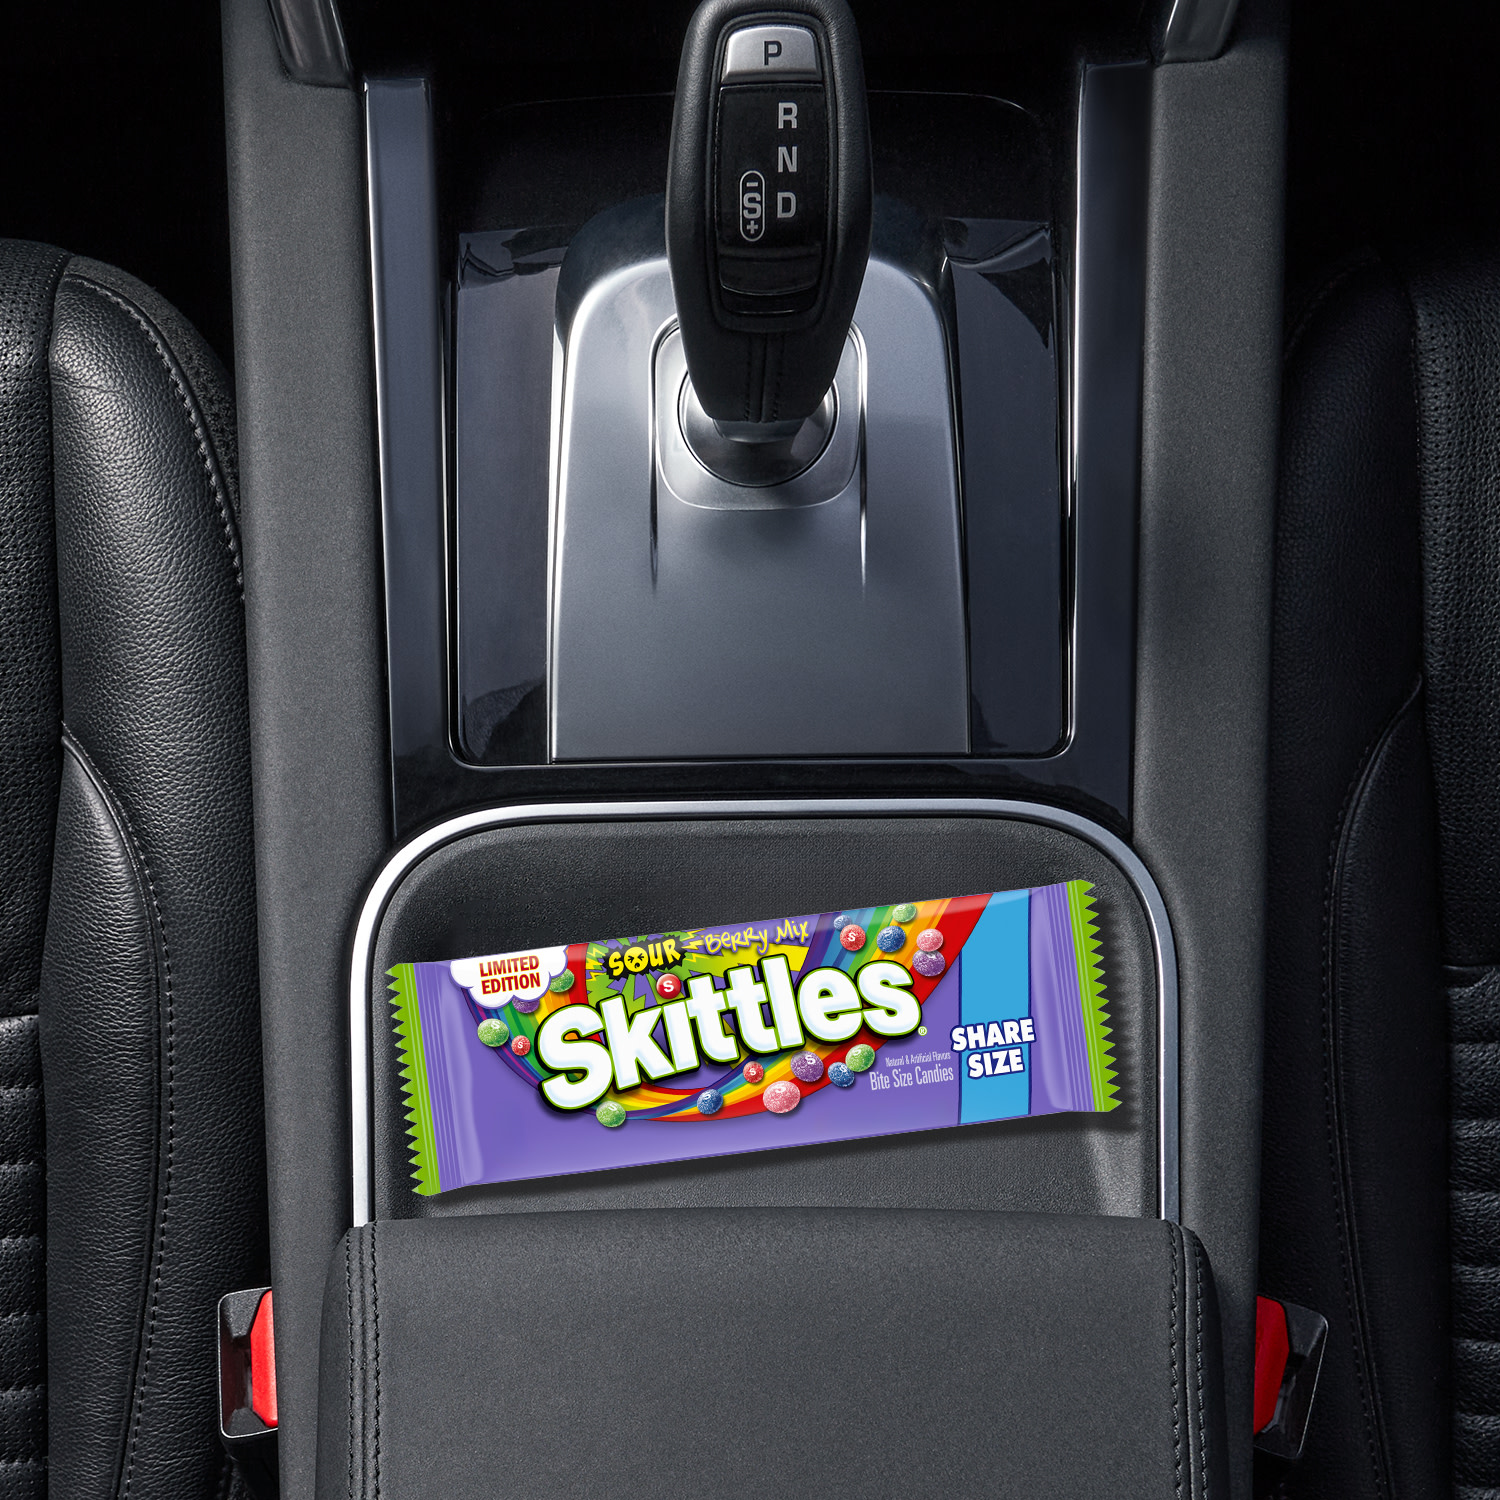 Skittles Sour Berry Limited Edition Chewy Candy, Sharing Size - 3.3 oz Bag - image 4 of 13